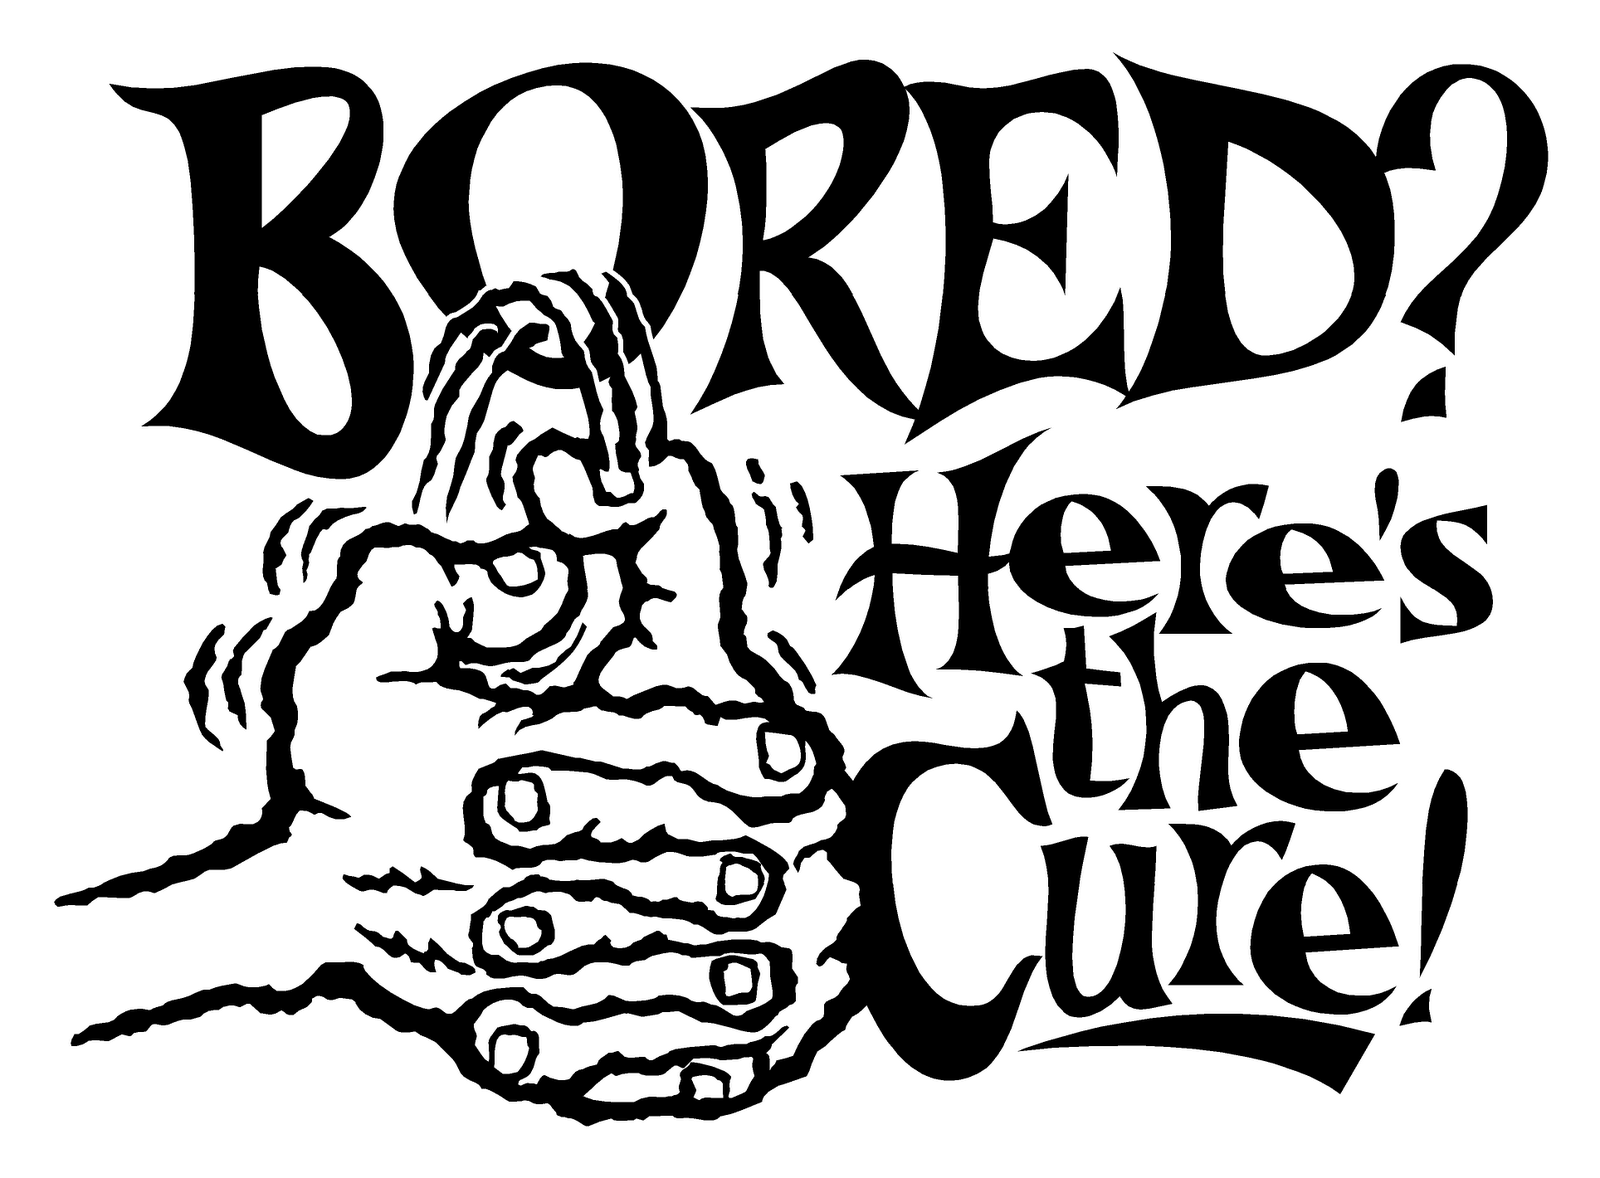 Bored Here's The Cure